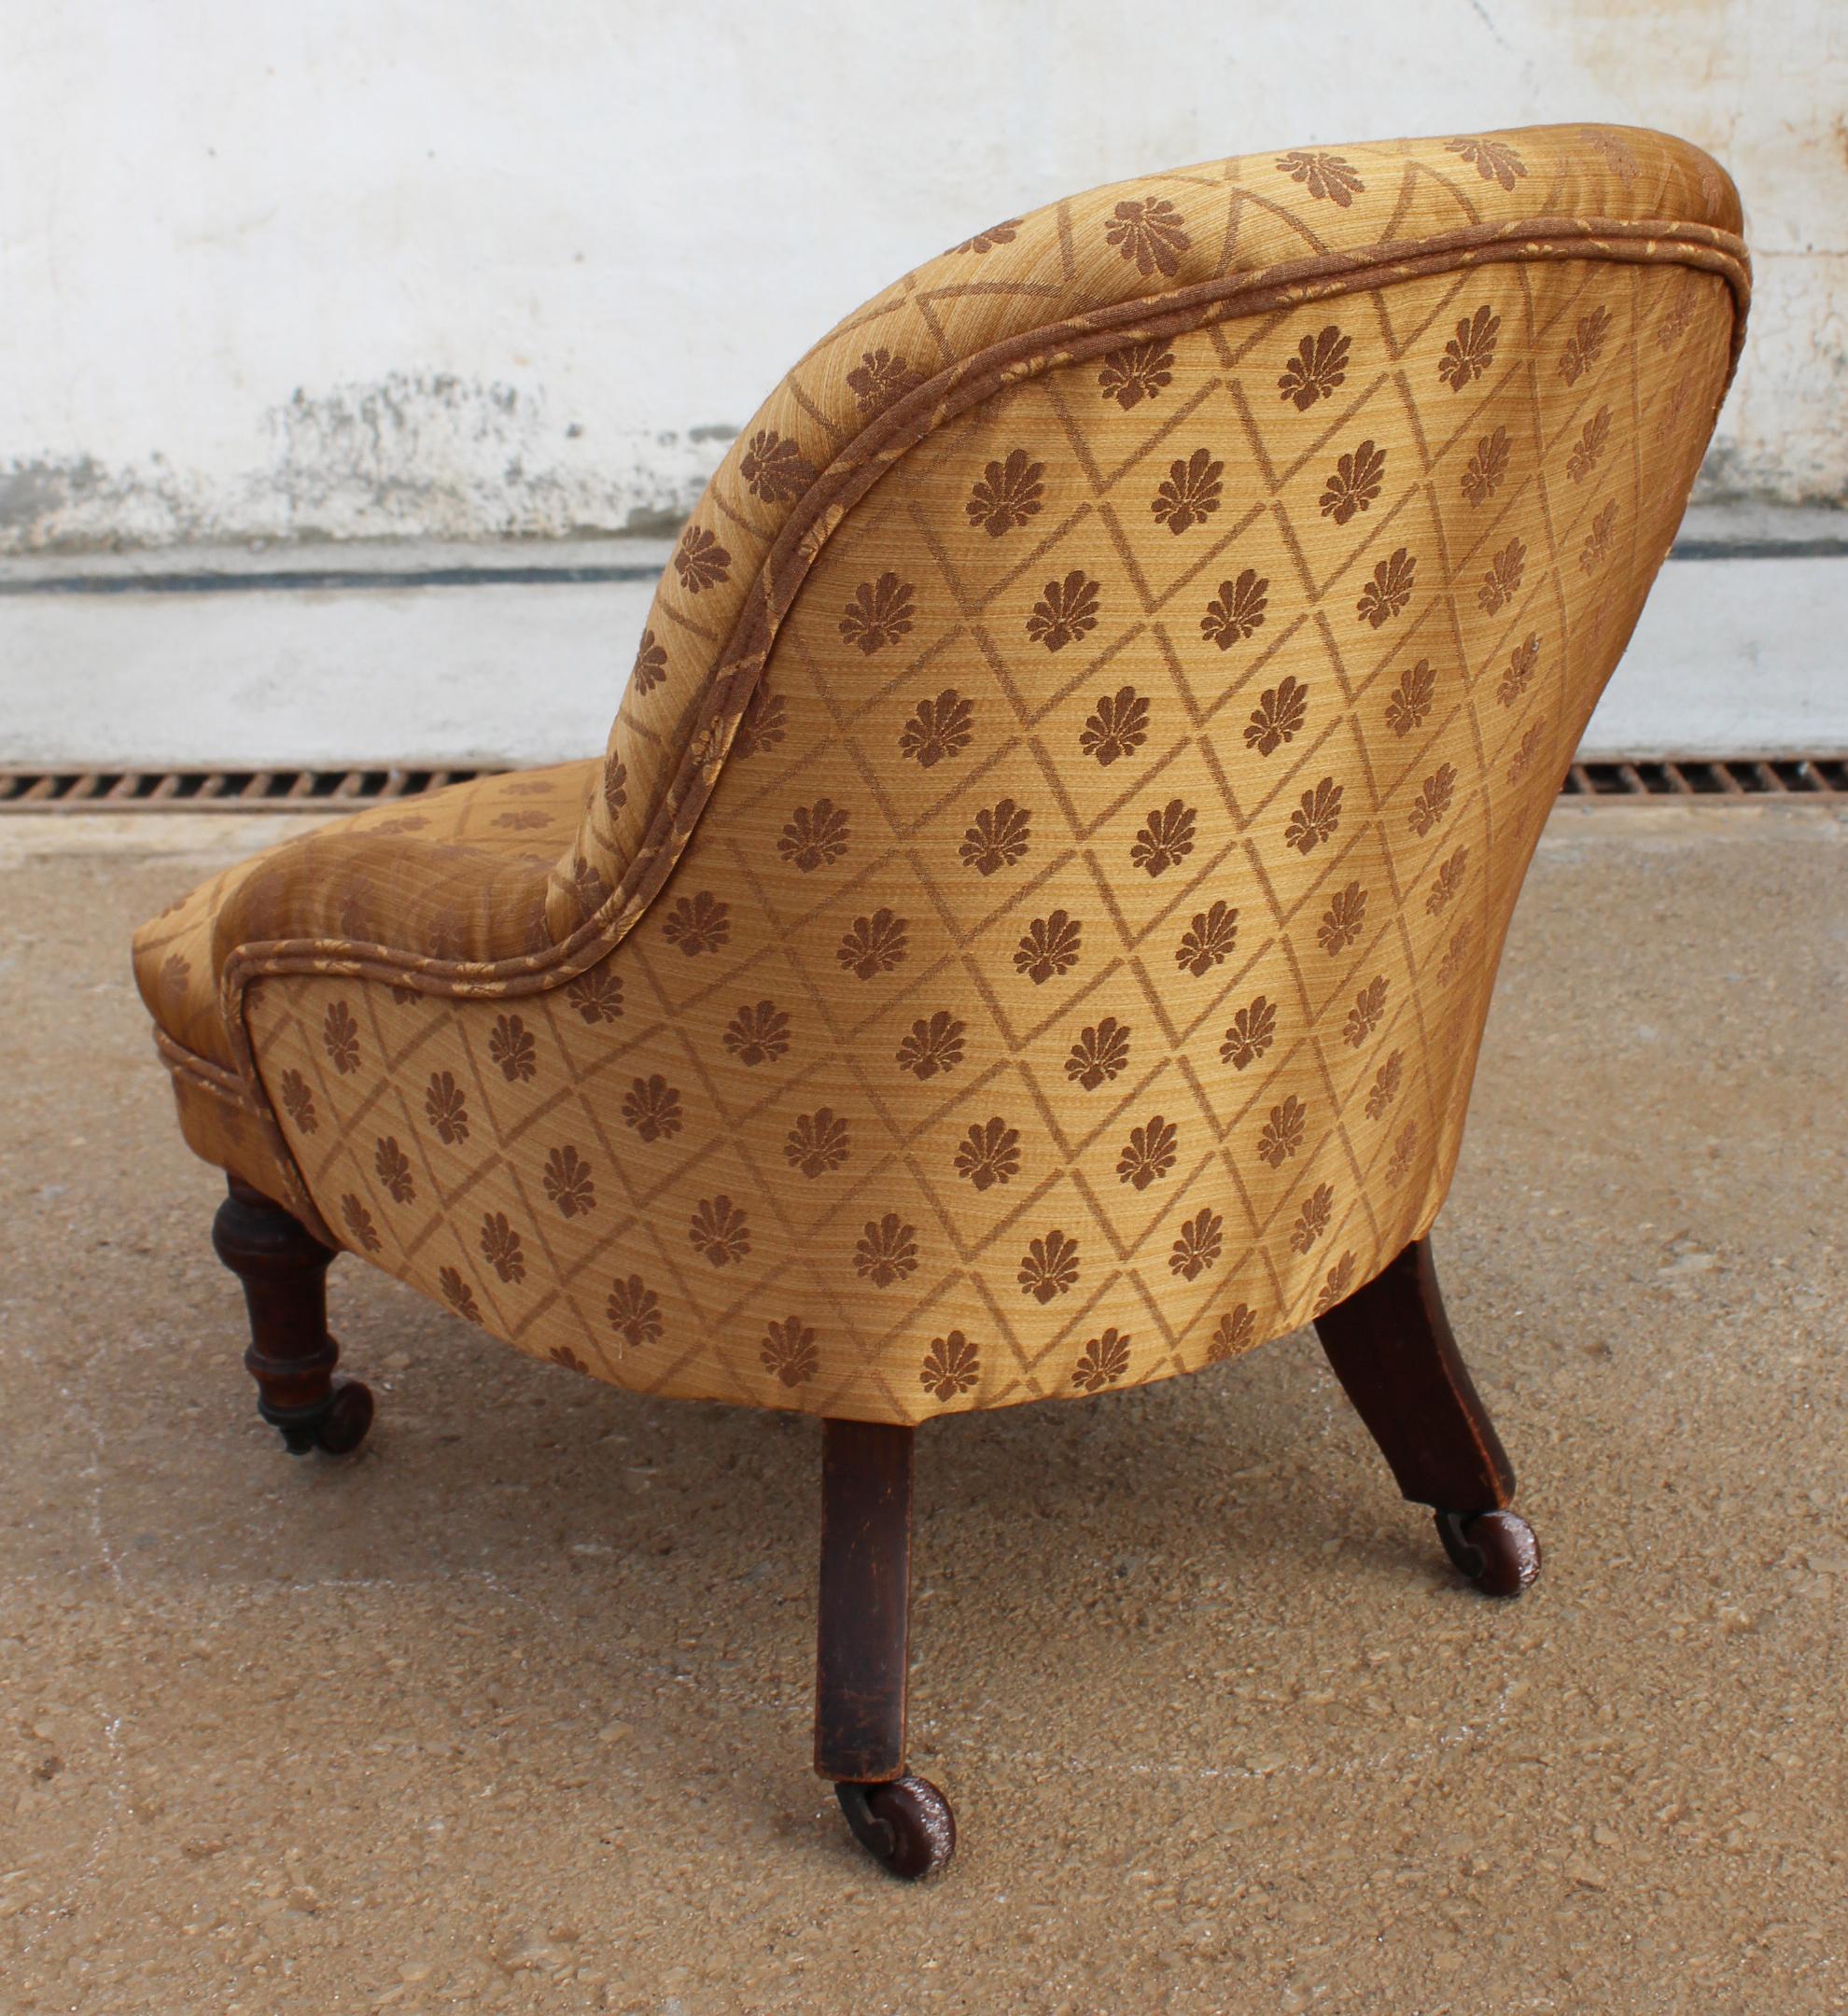 19th Century English Children's Chair with Mahogany Legs and Silk Upholstery For Sale 4